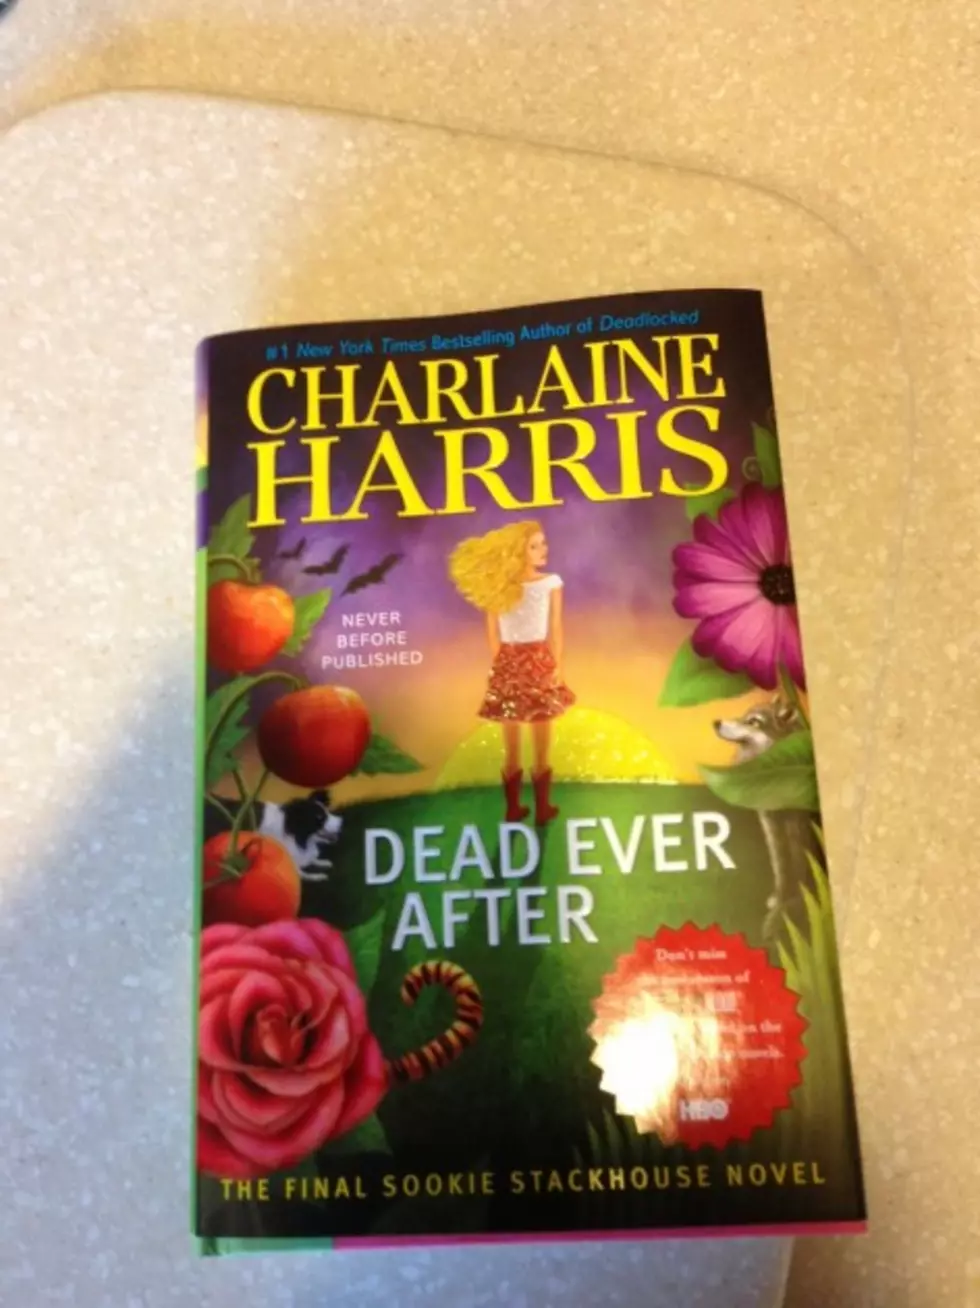 The Last Book In The Sookie Stackhouse Series Came In The Mail Yesterday!